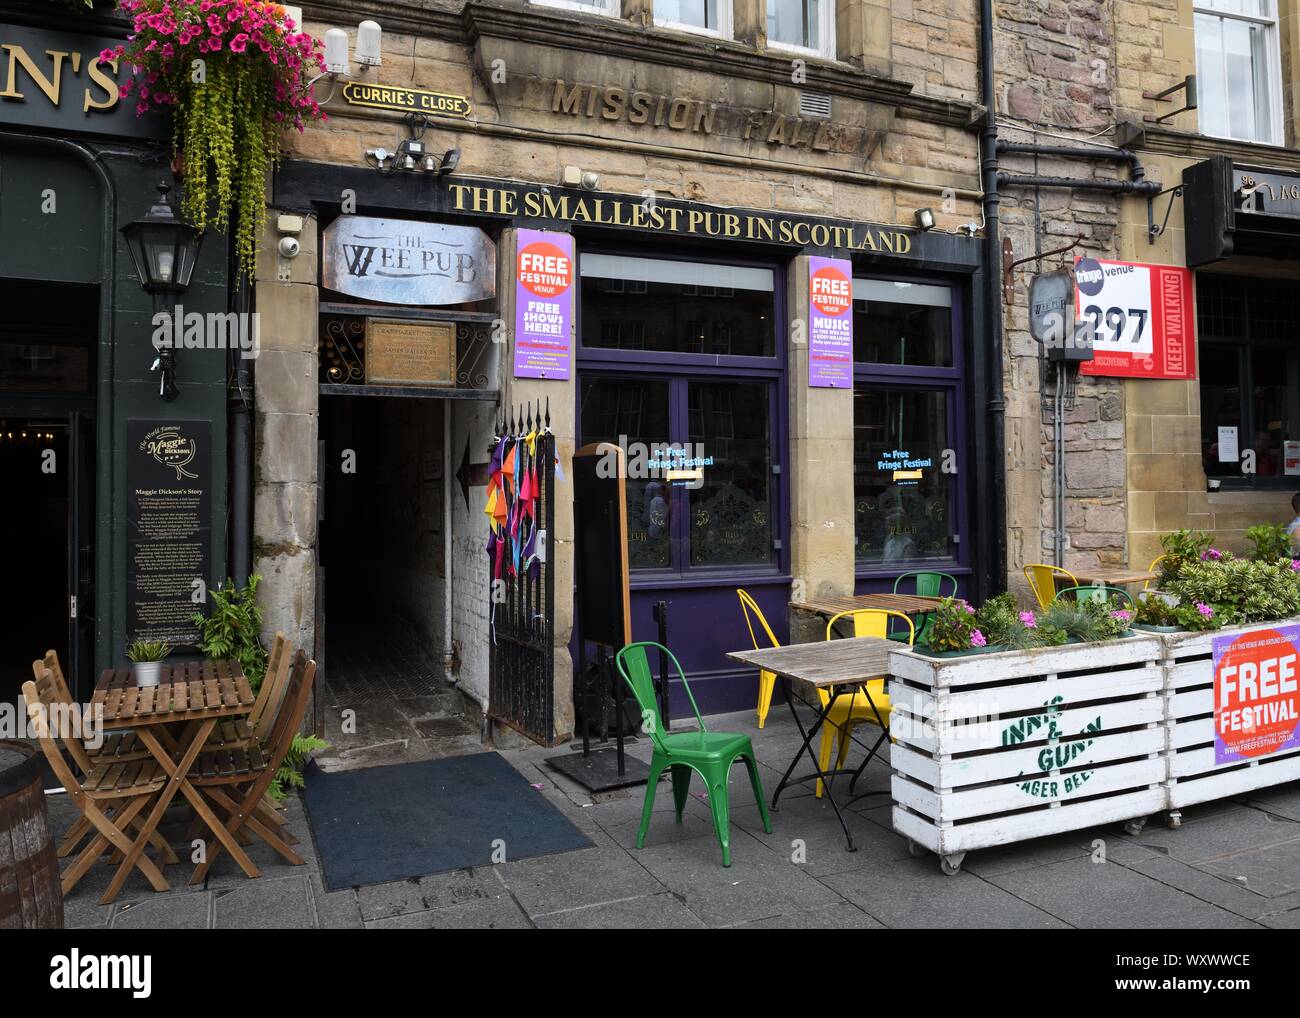 The 'Wee Pub' at Currie's Close in Edinburgh's Grassmarket claims to be 'The Smallest Pub in Scotland'. Stock Photo